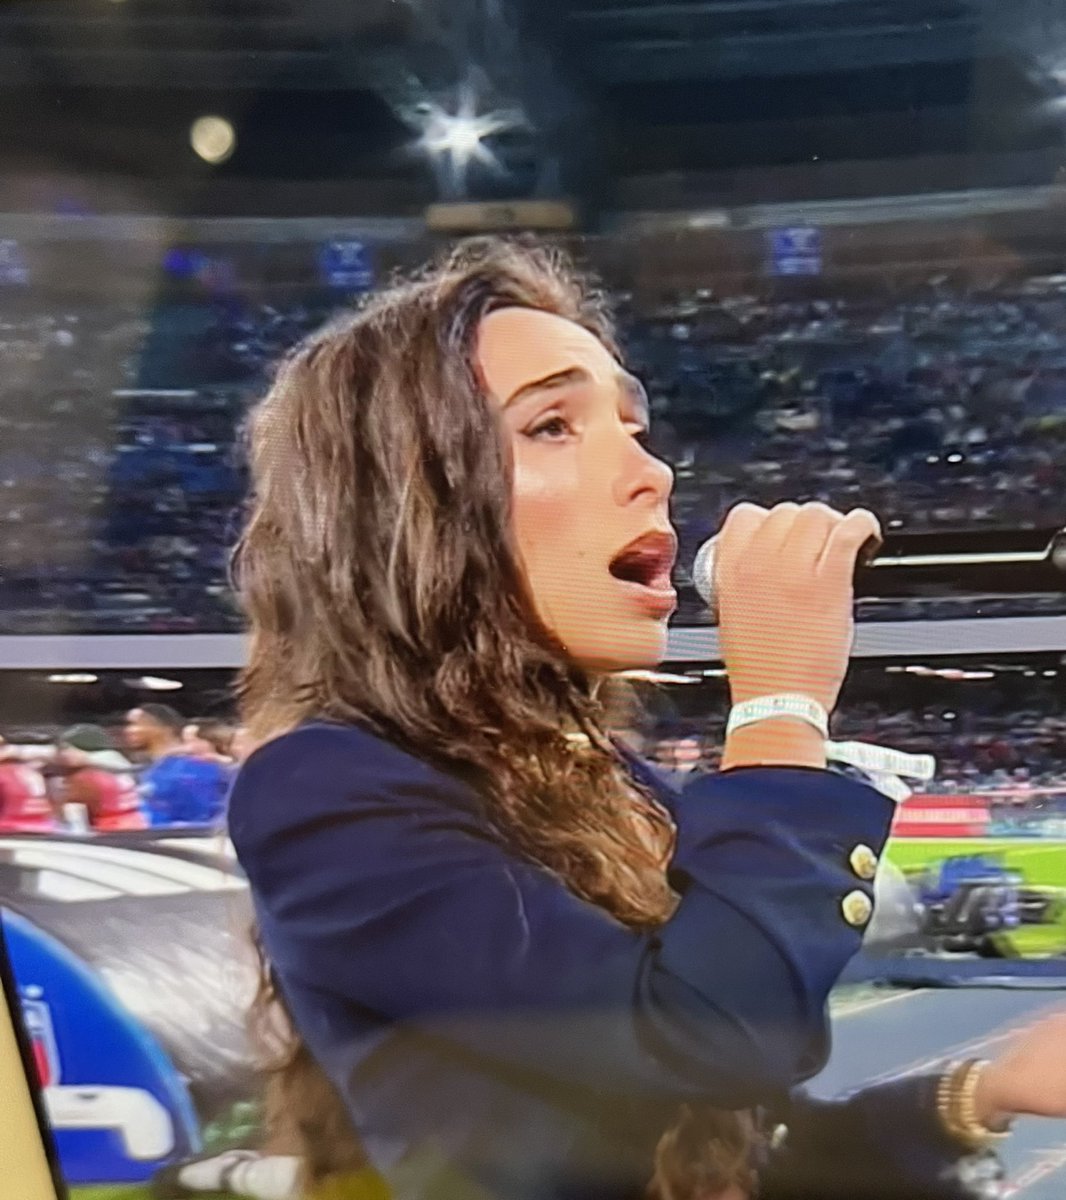 Wanted for crimes against the national anthem #ITAENG